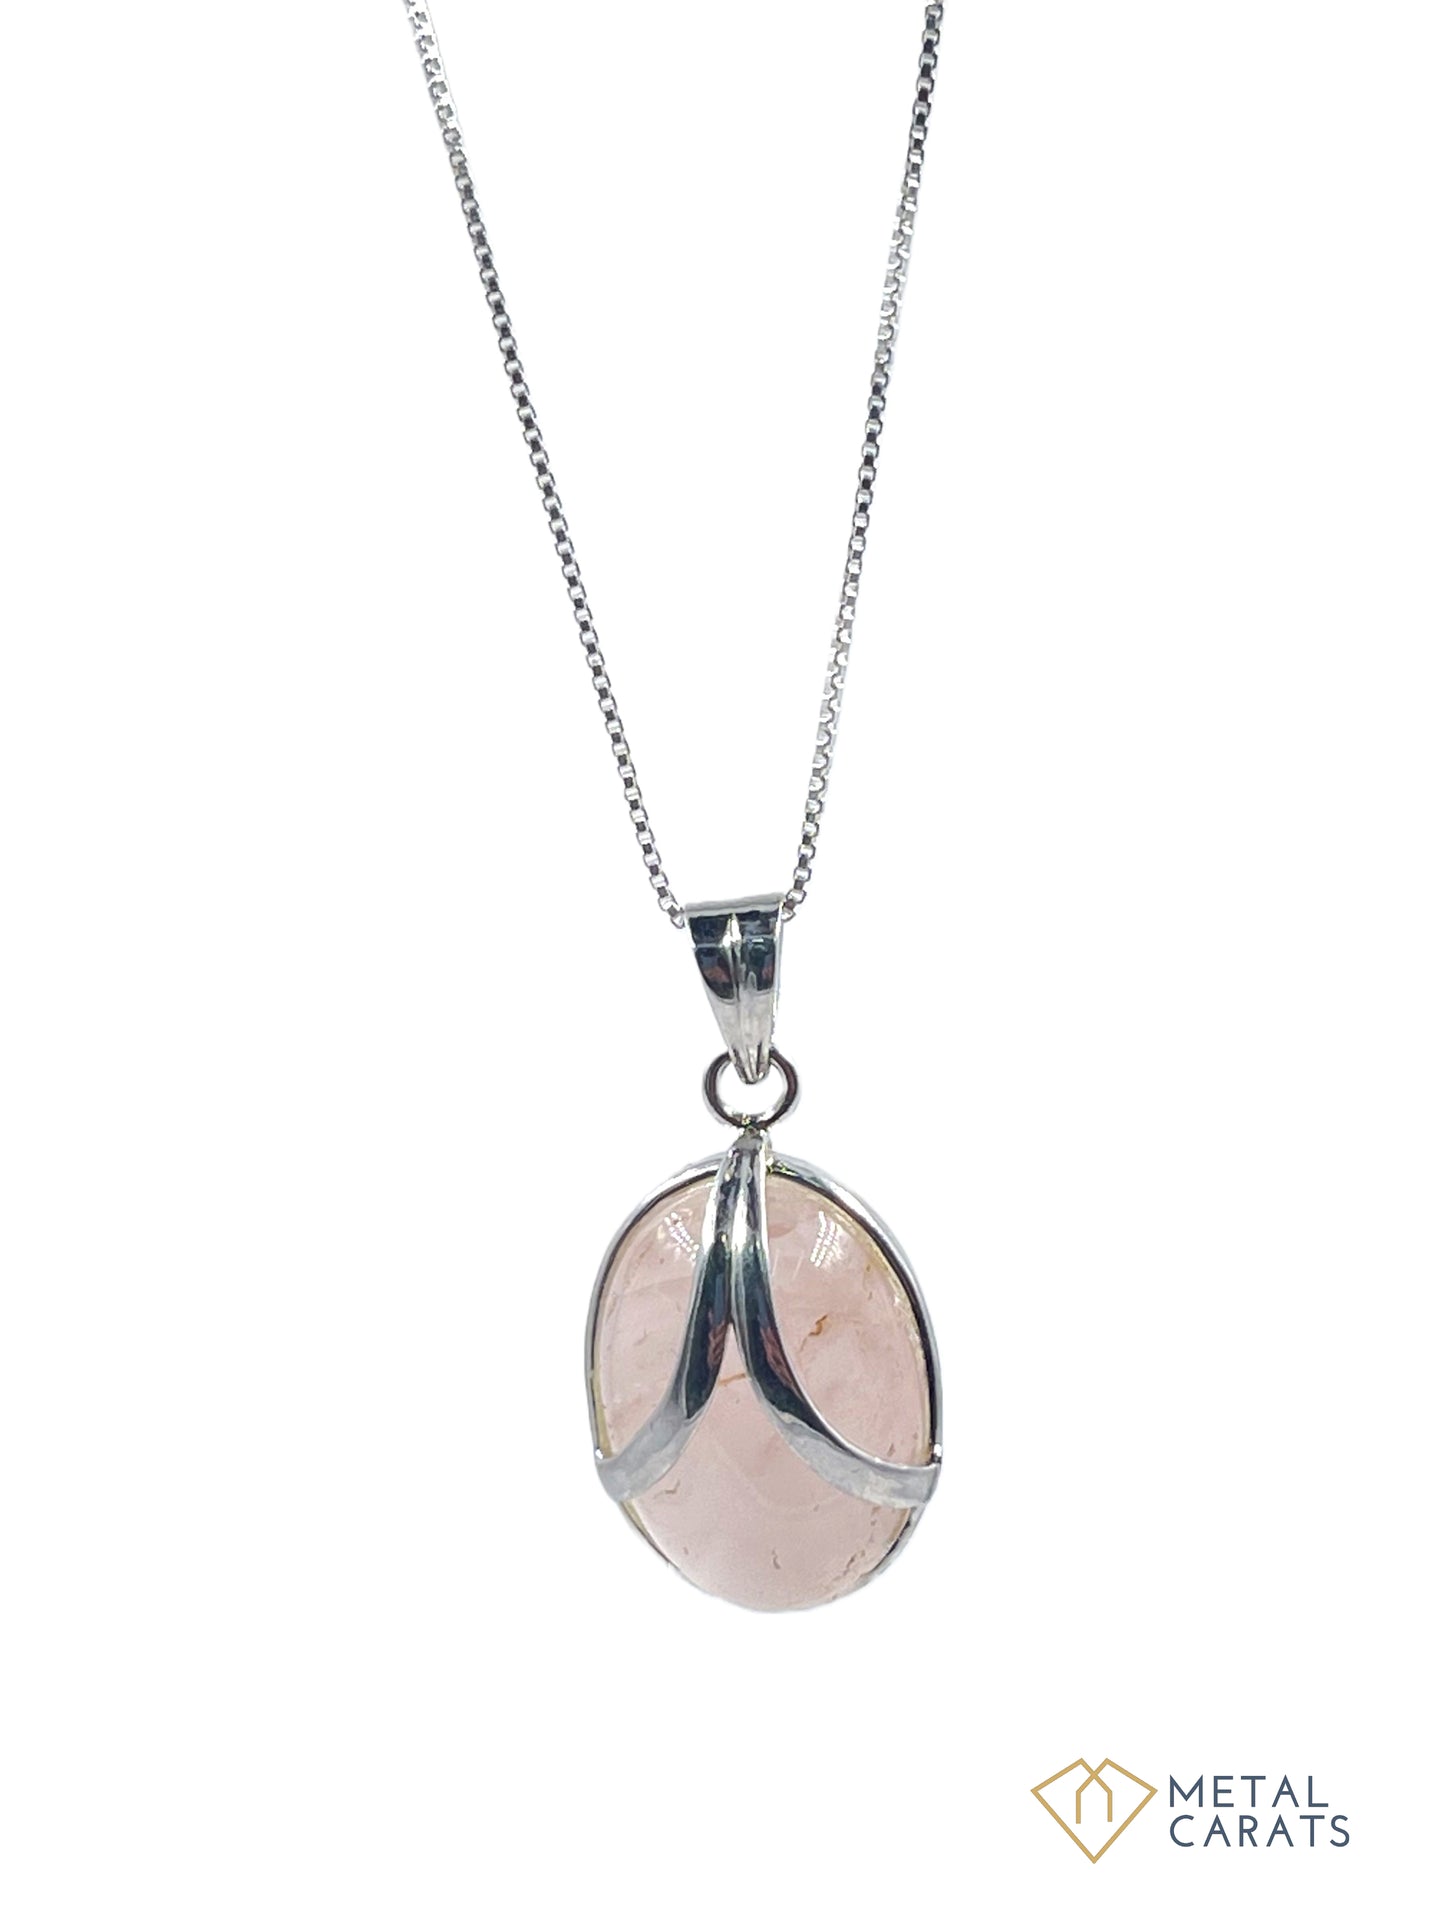 METALCARATS Metal Carats Rose Quartz Overal Setting in 925 Sterling Silver | Women | Overlap Pattern | Sublte and Minimalistic